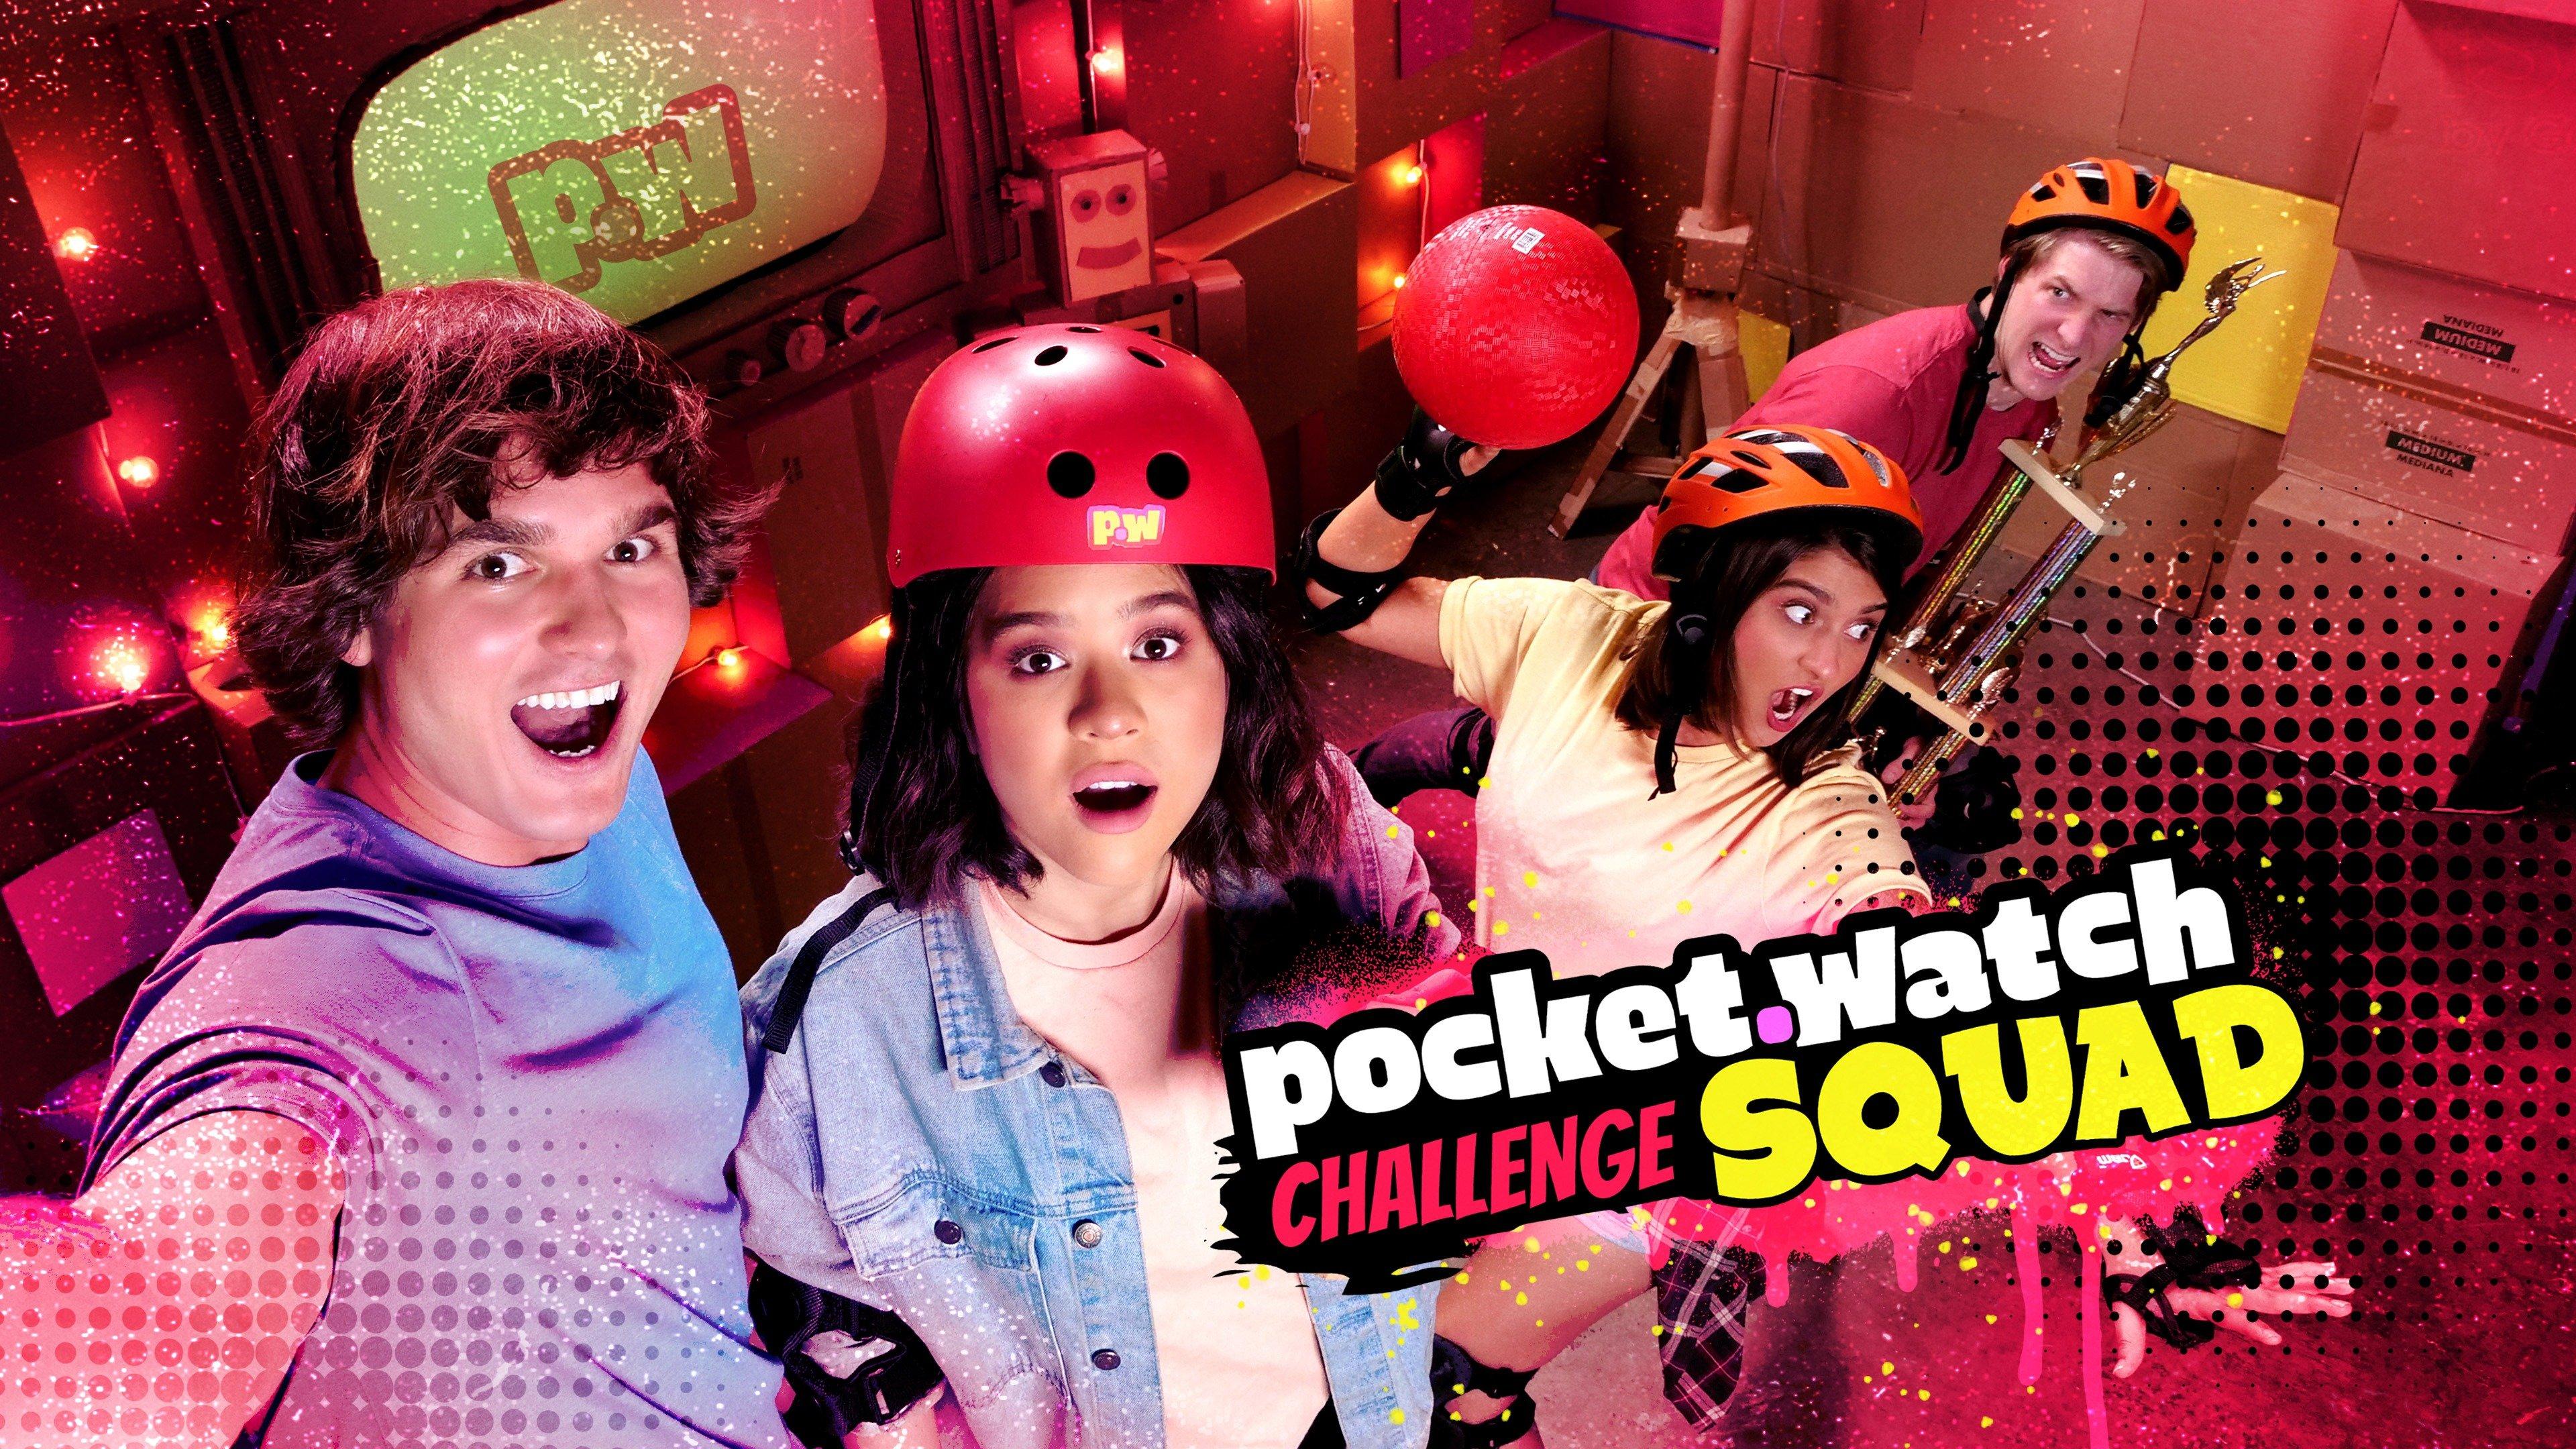 Watch pocket.watch Challenge Squad Streaming Online on Philo (Free Trial)